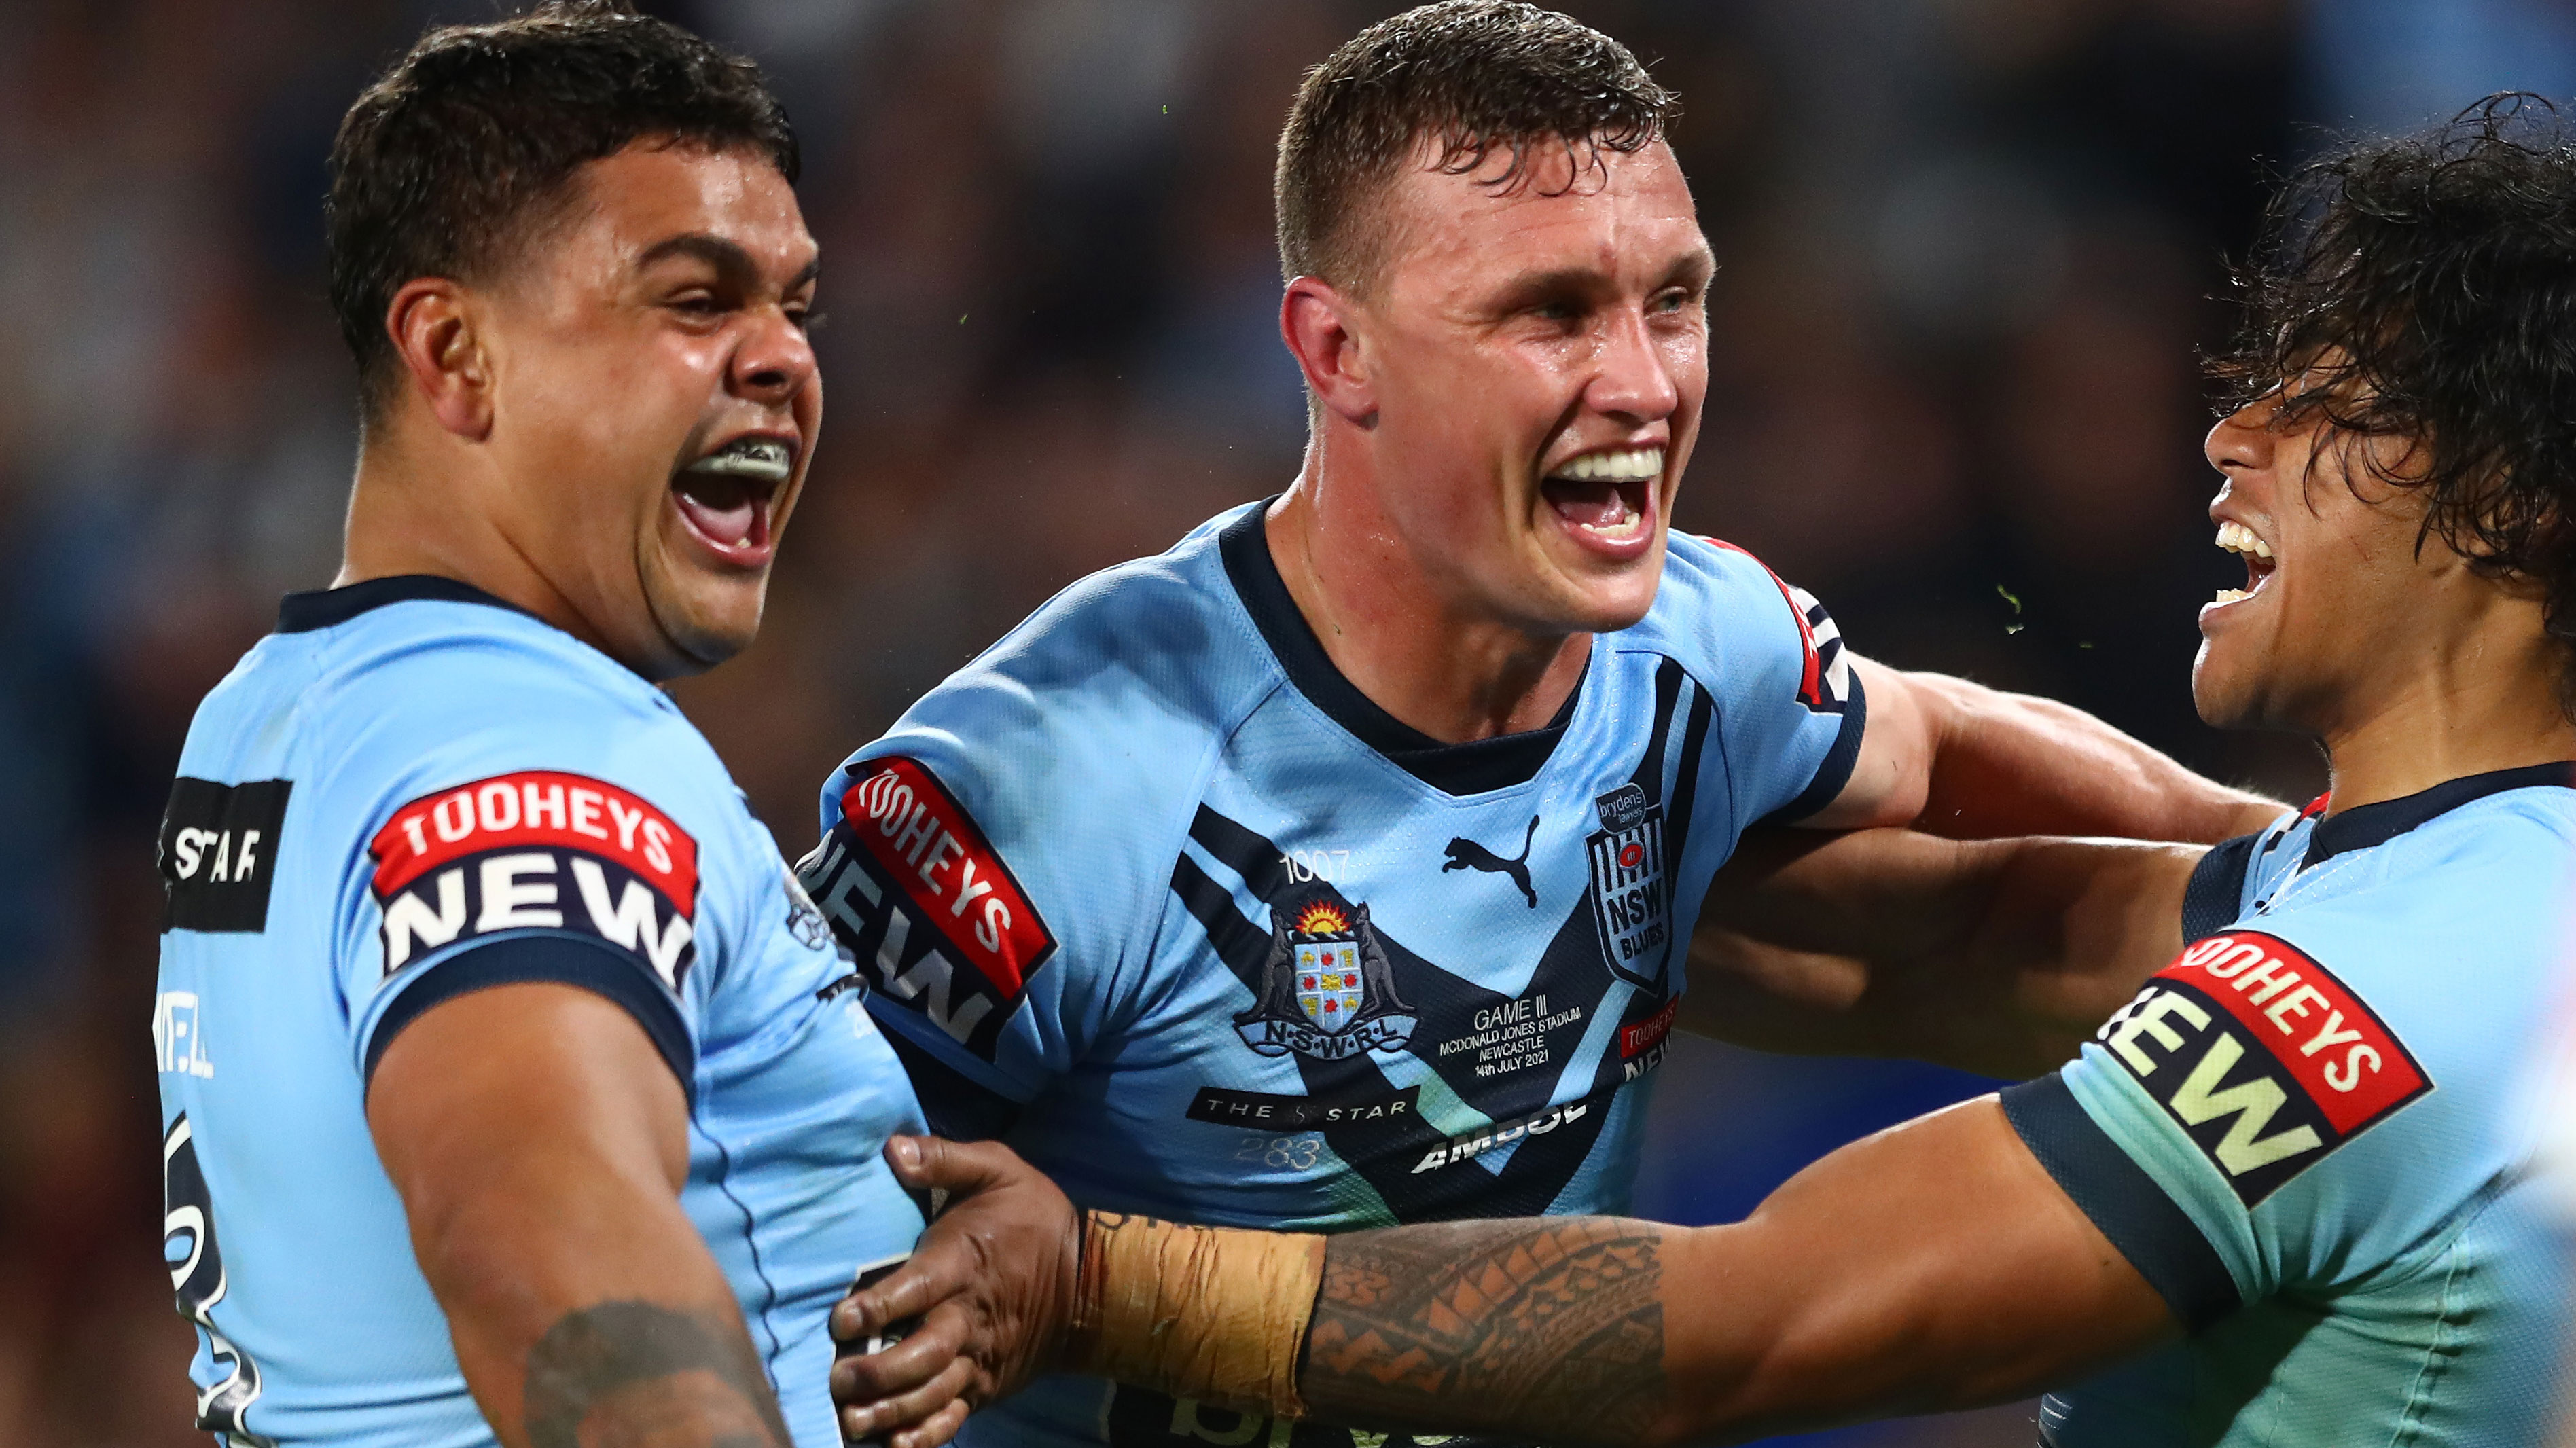 State of Origin 2022 live stream guide How to watch the series live and free, NSW v Queensland